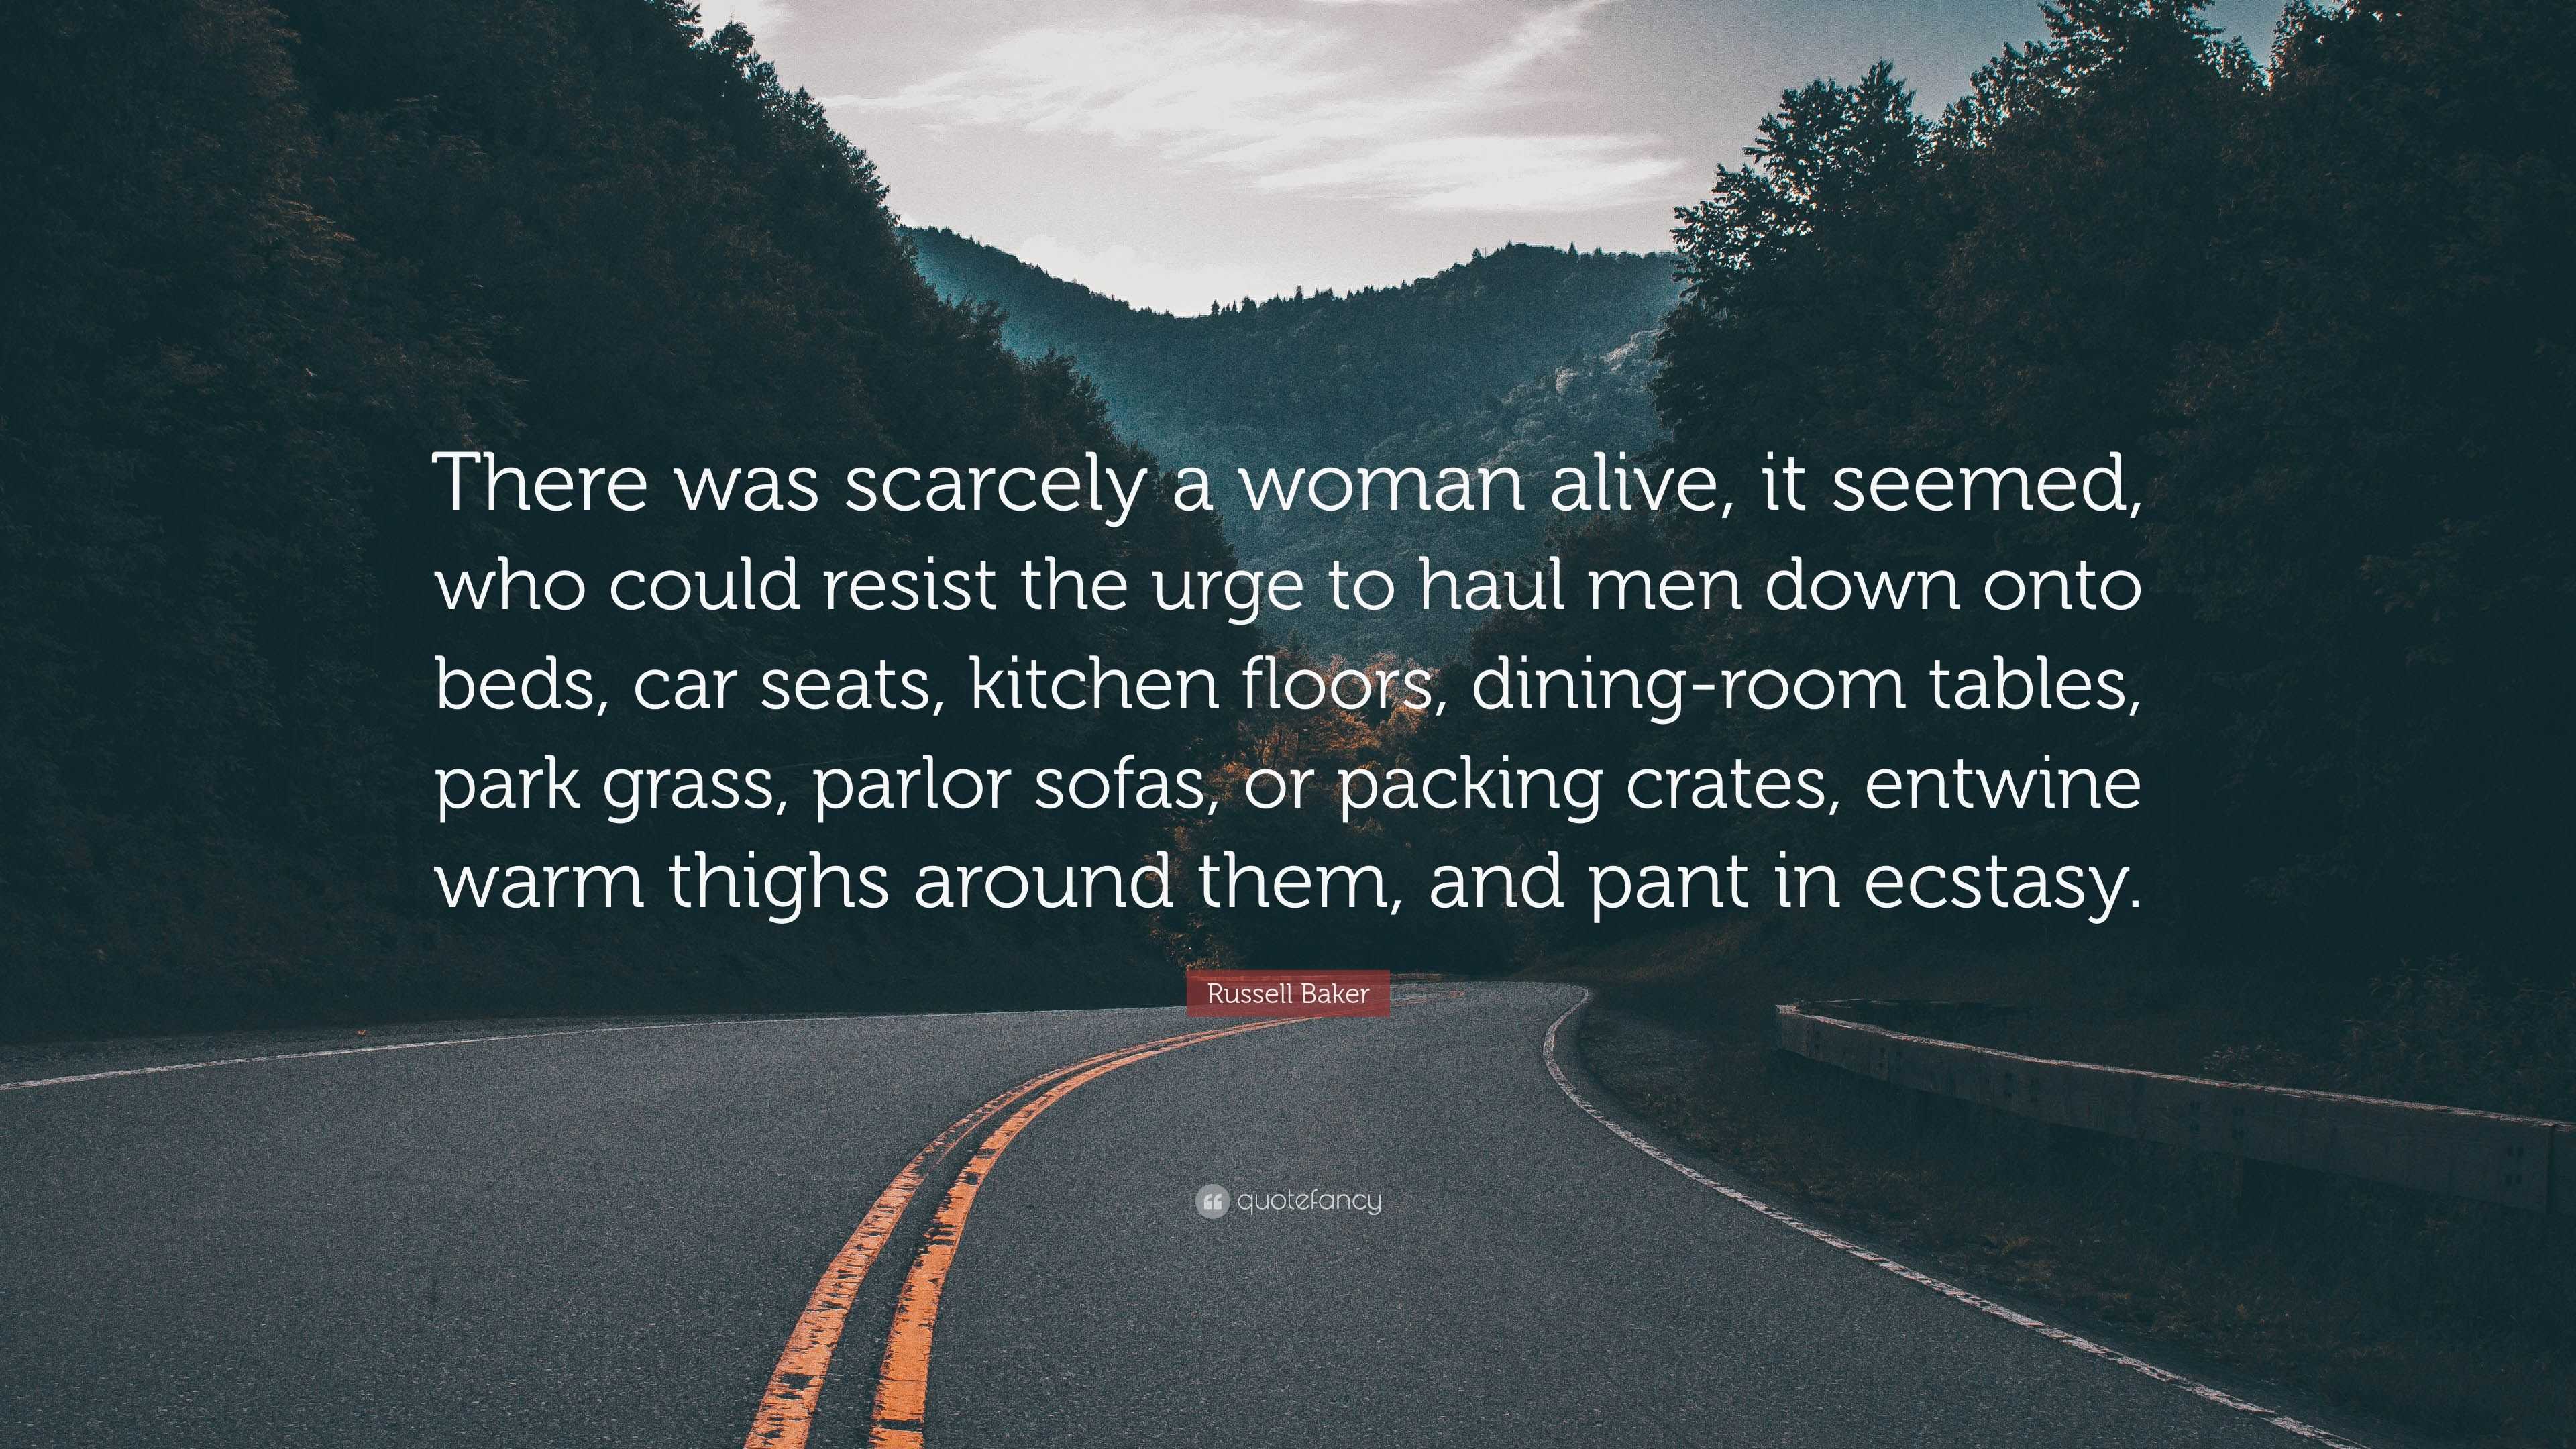 Russell Baker Quote: “There was scarcely a woman alive, it seemed, who ...